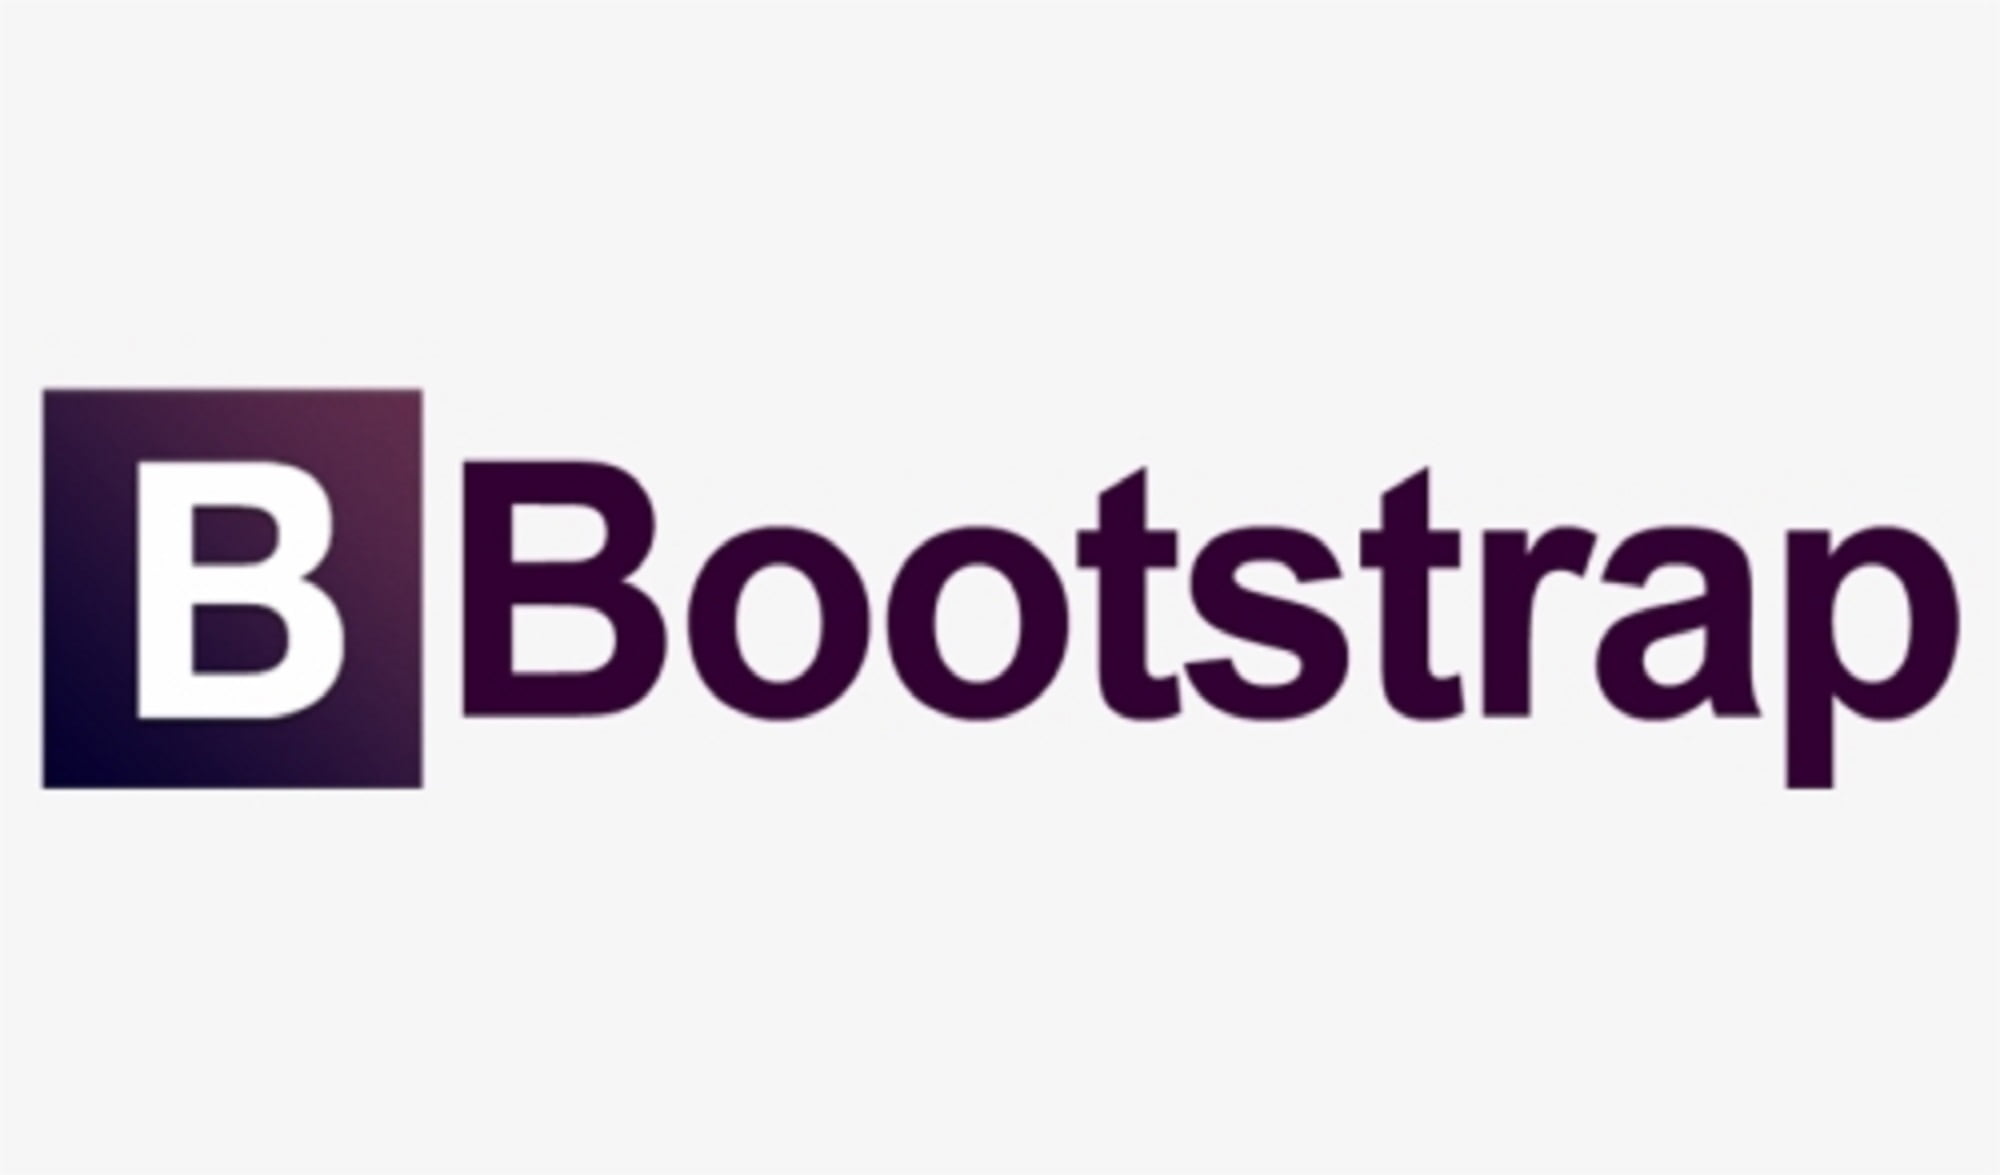 bootstrap in USA